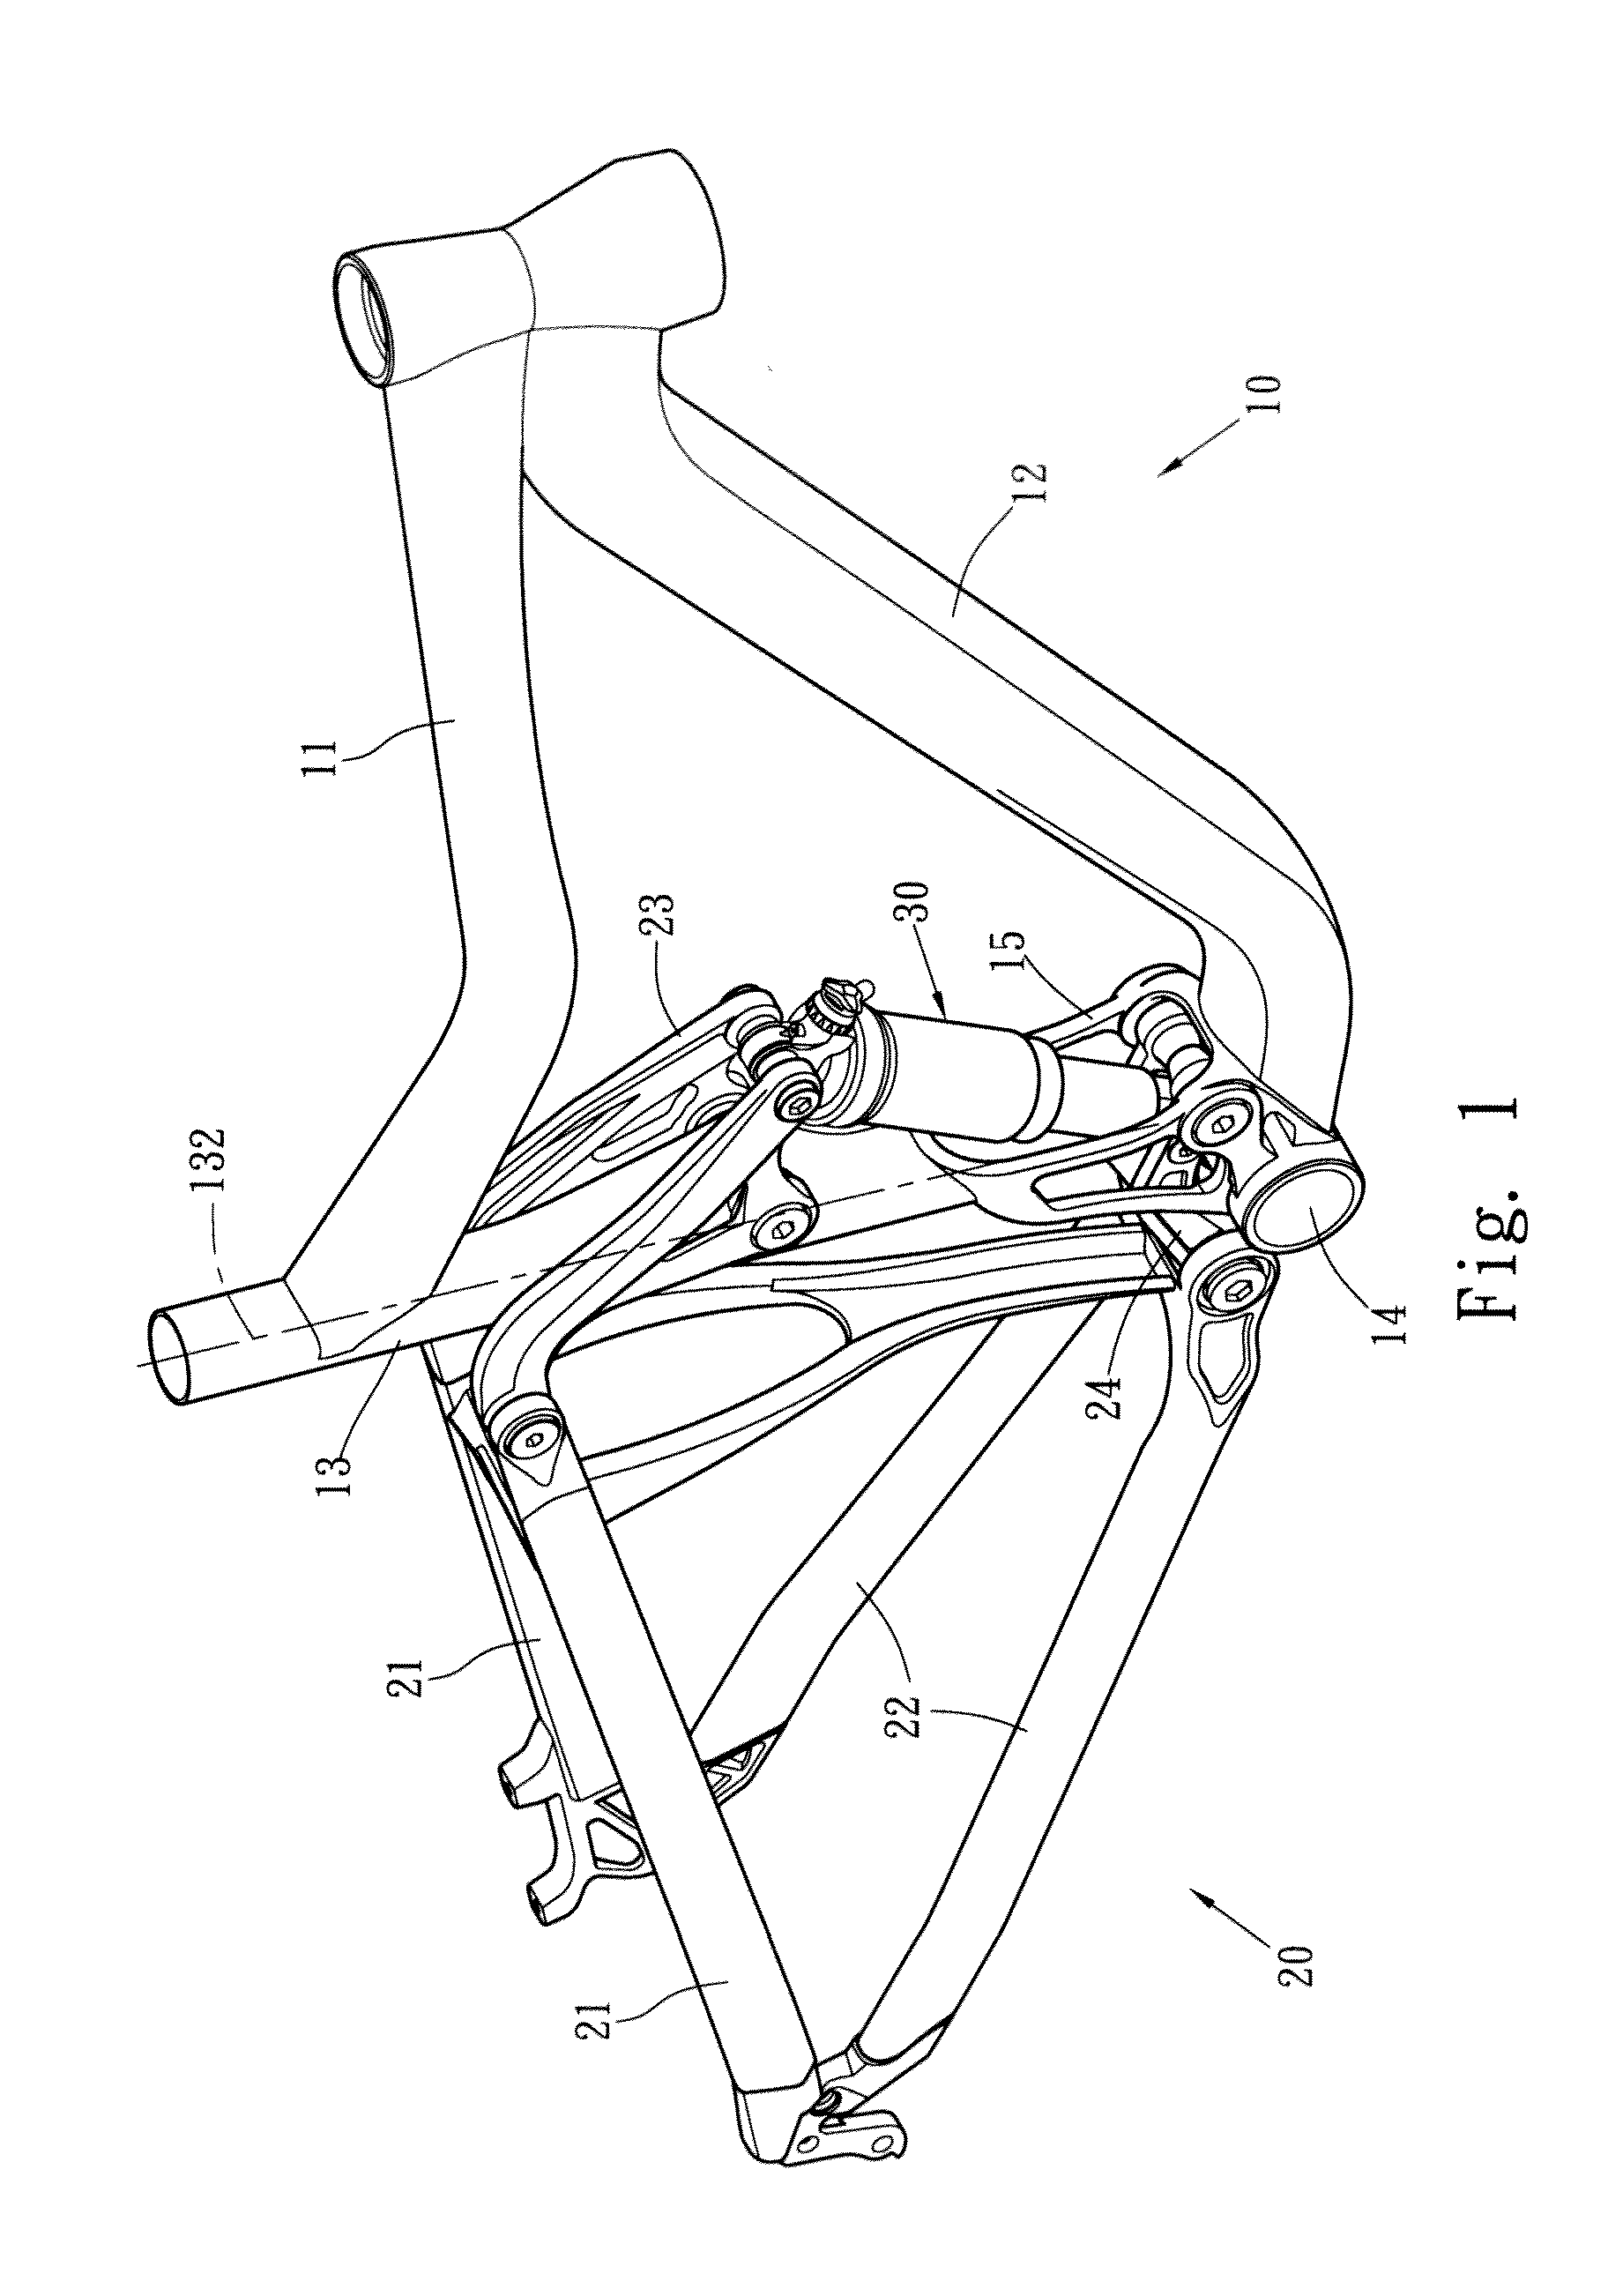 Rear suspension system for bicycles